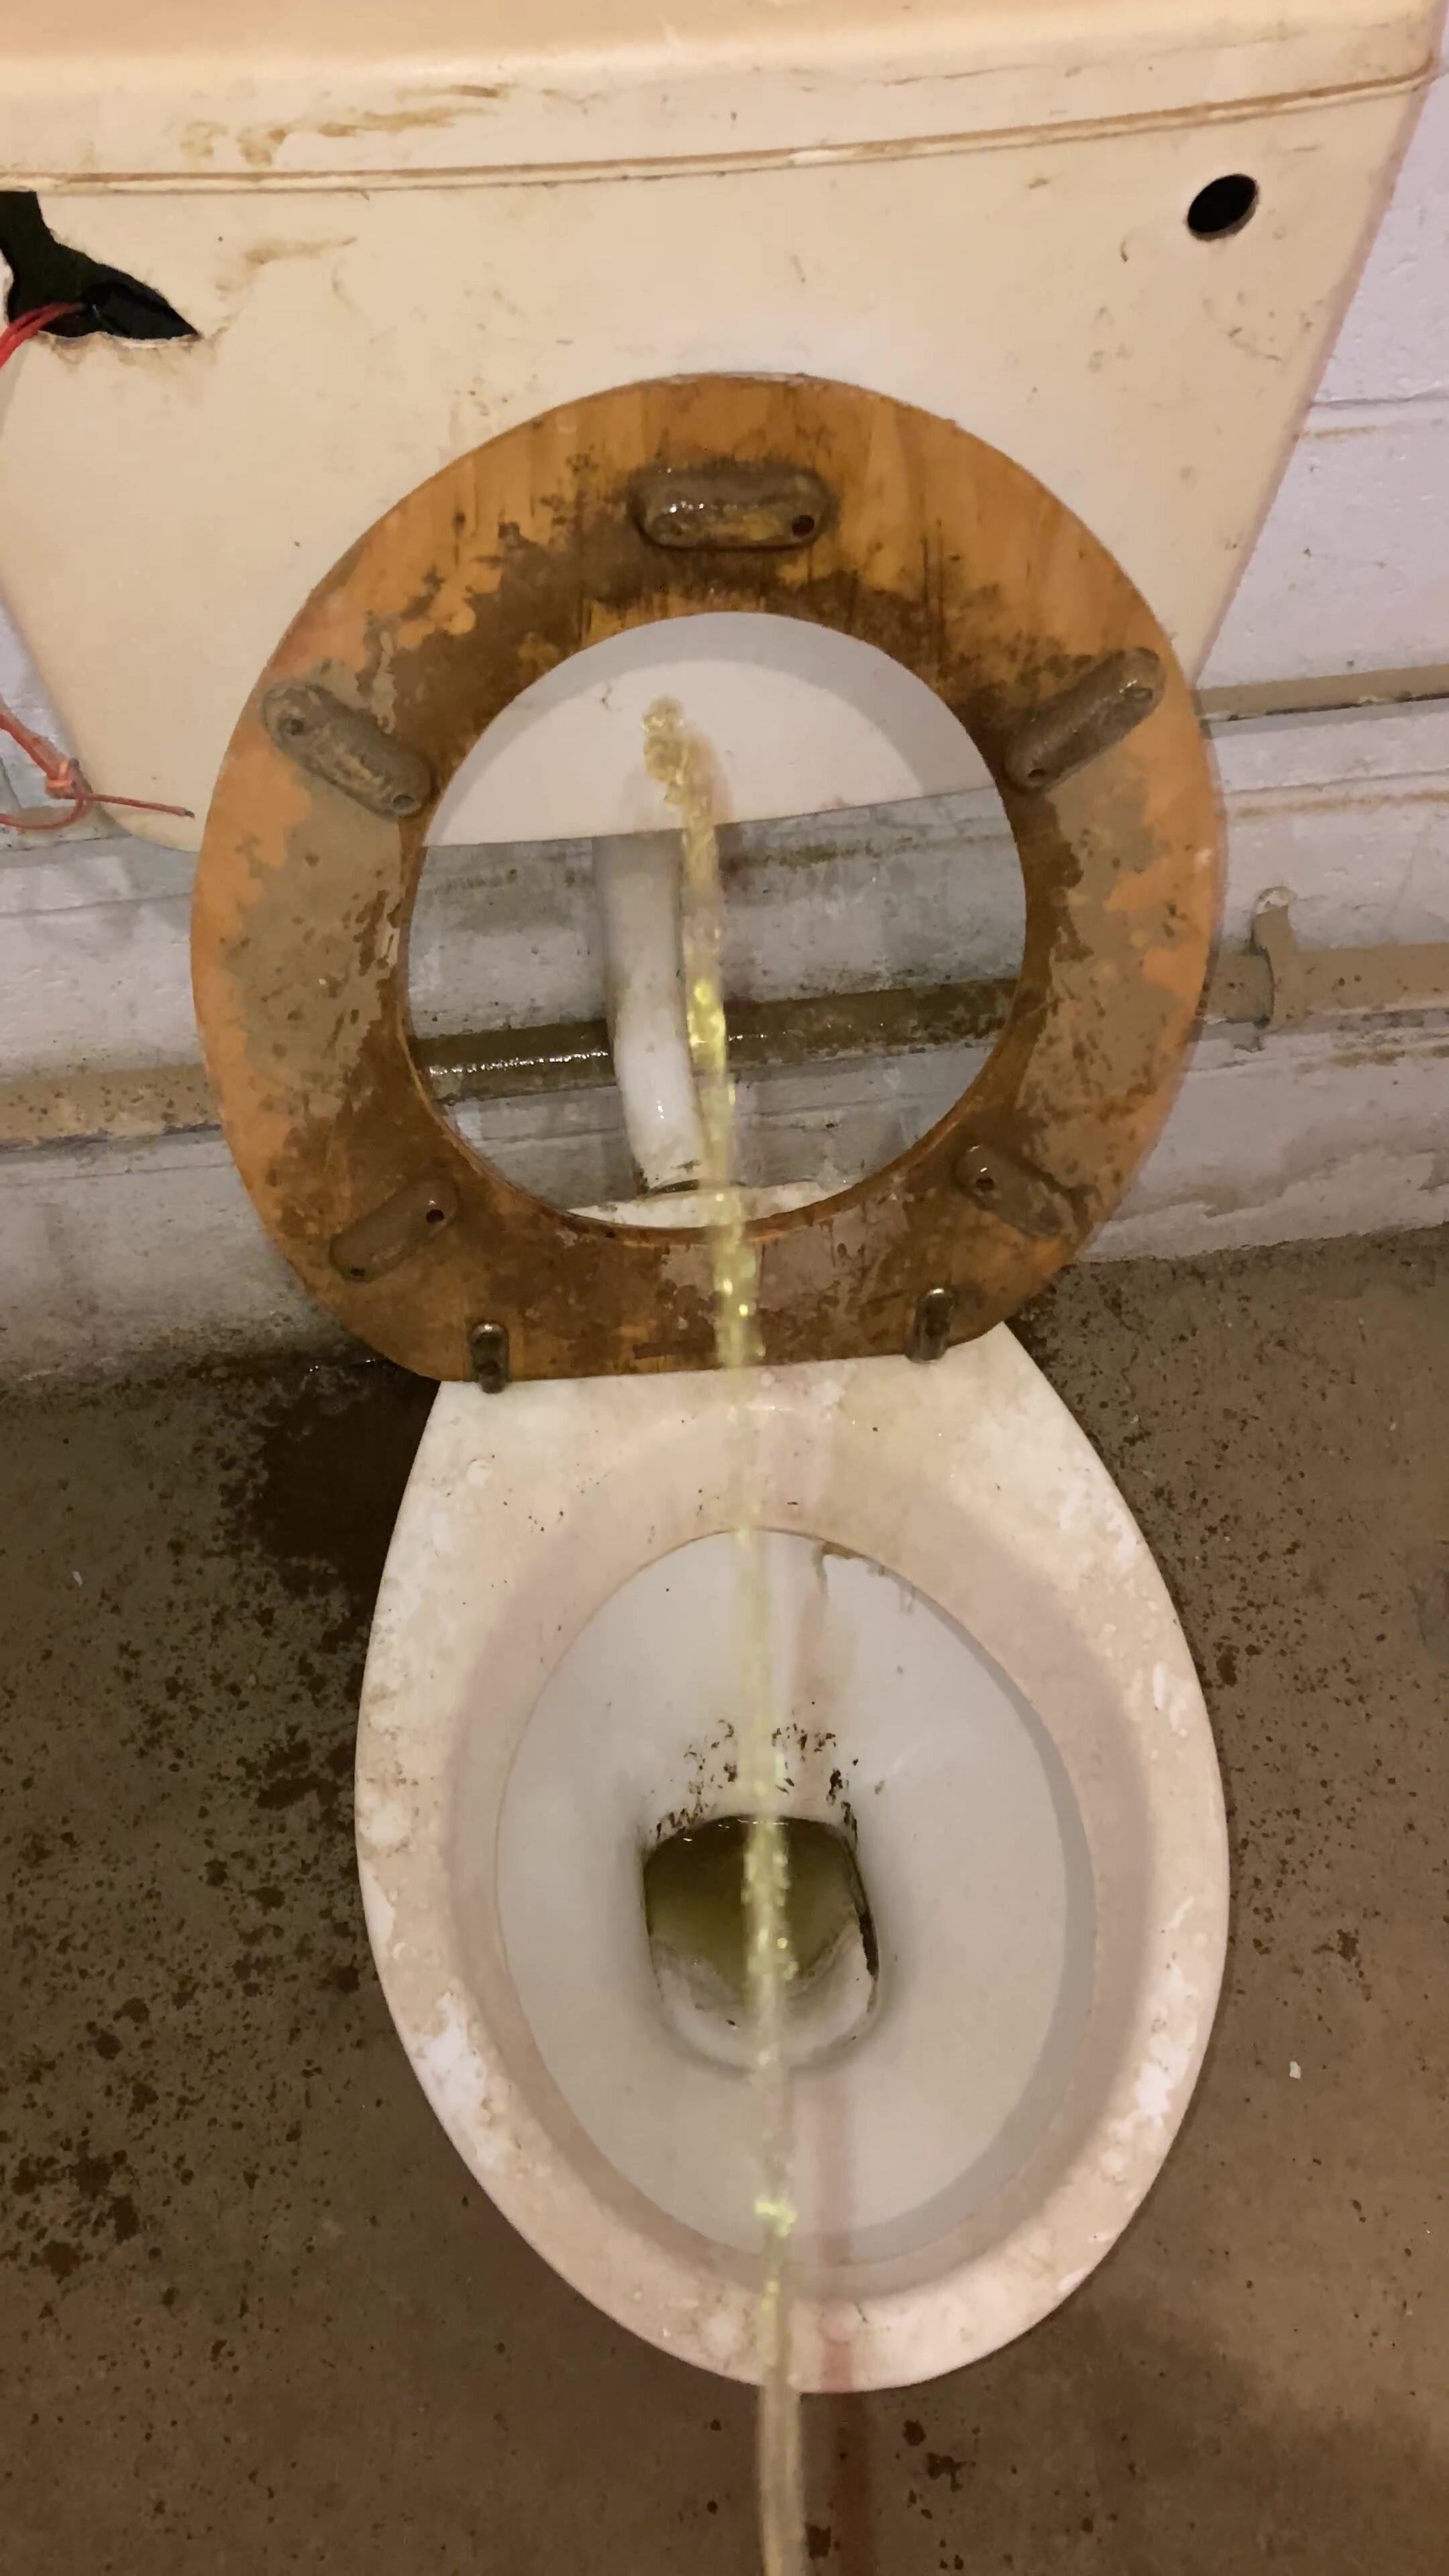 Pissing up the work toilet